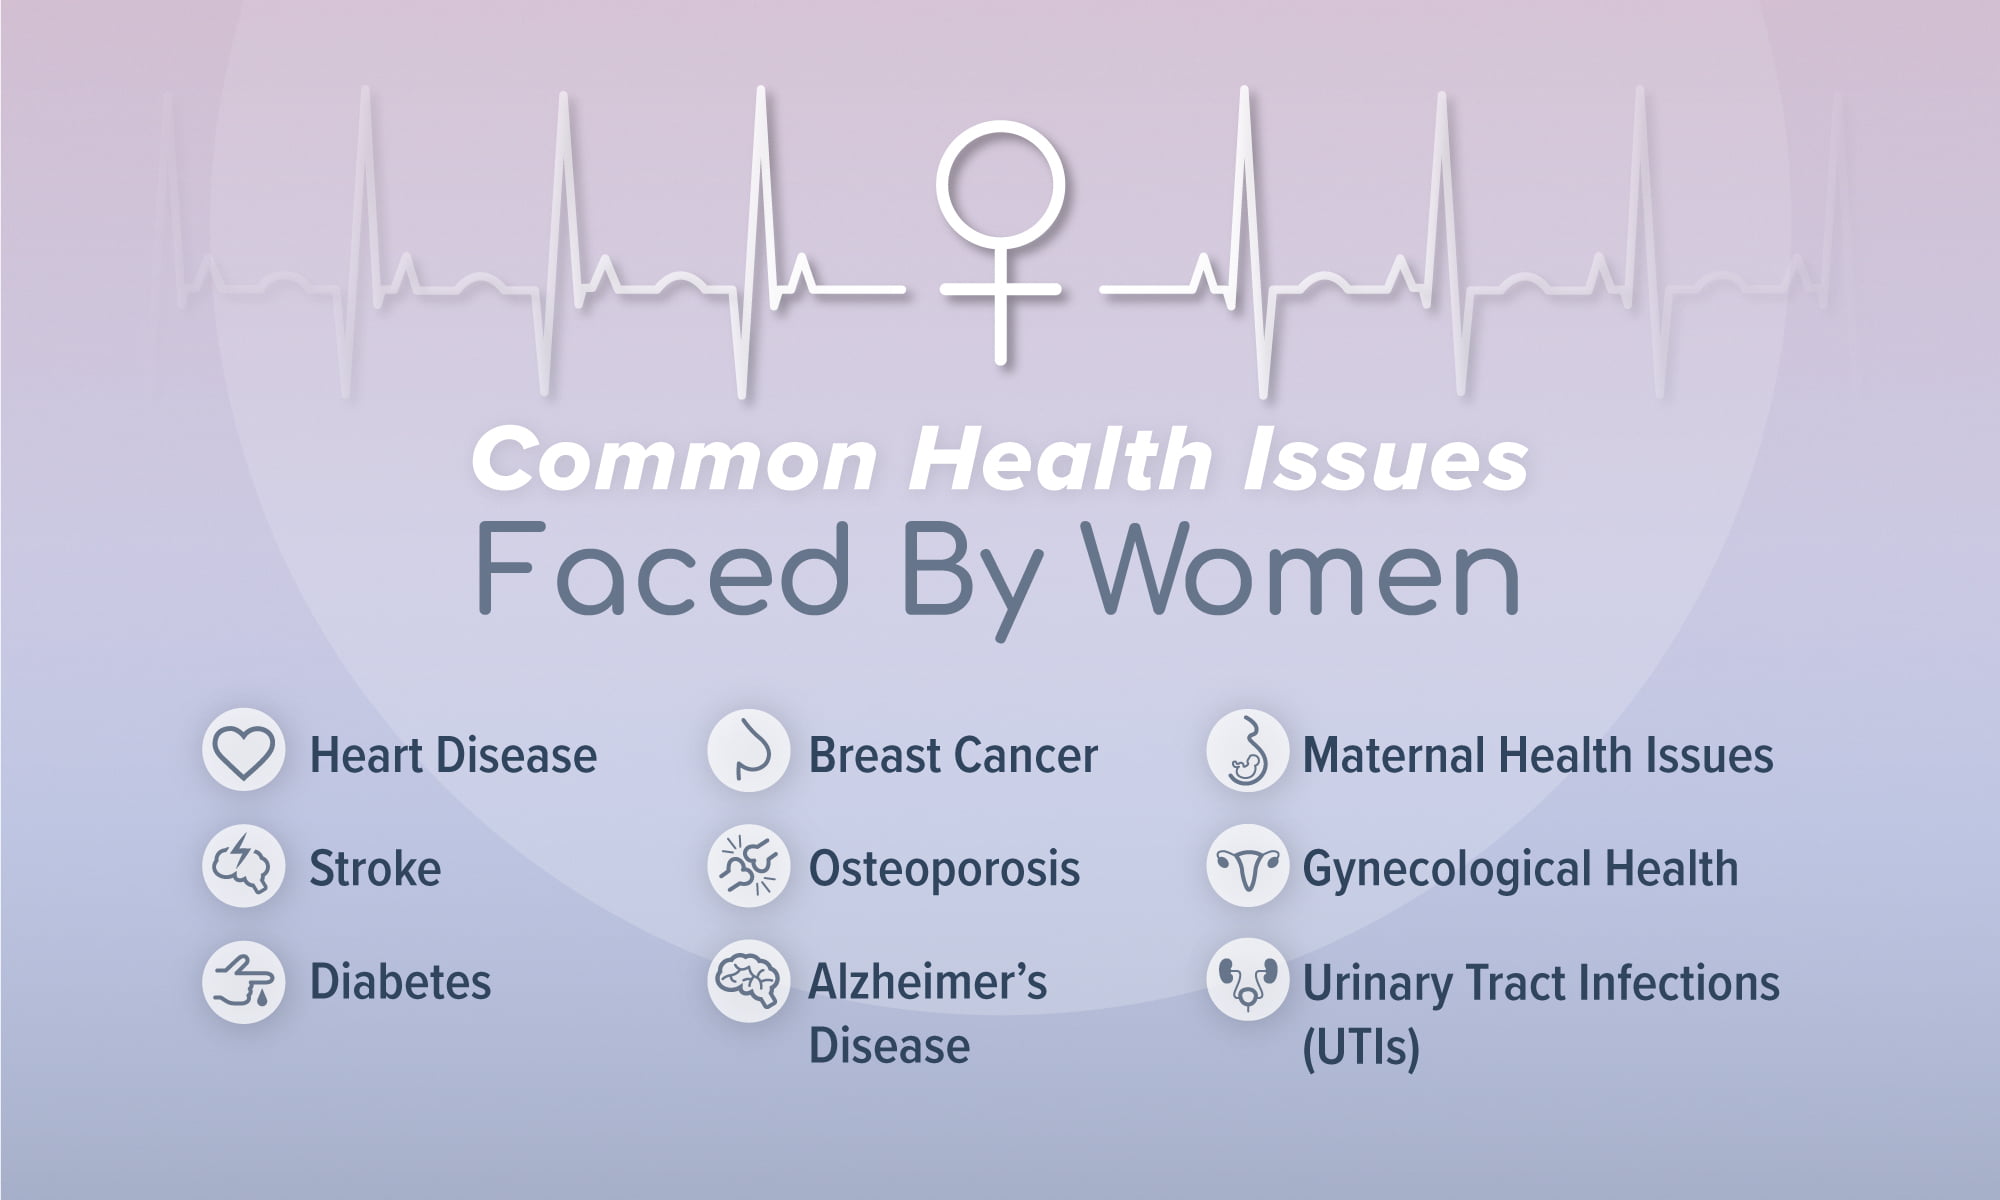 An infographic listing common health issues faced by women, including heart disease, breast cancer, maternal health issues, stroke, osteoporosis, gynecological health, diabetes, Alzheimer's disease, and urinary tract infections.